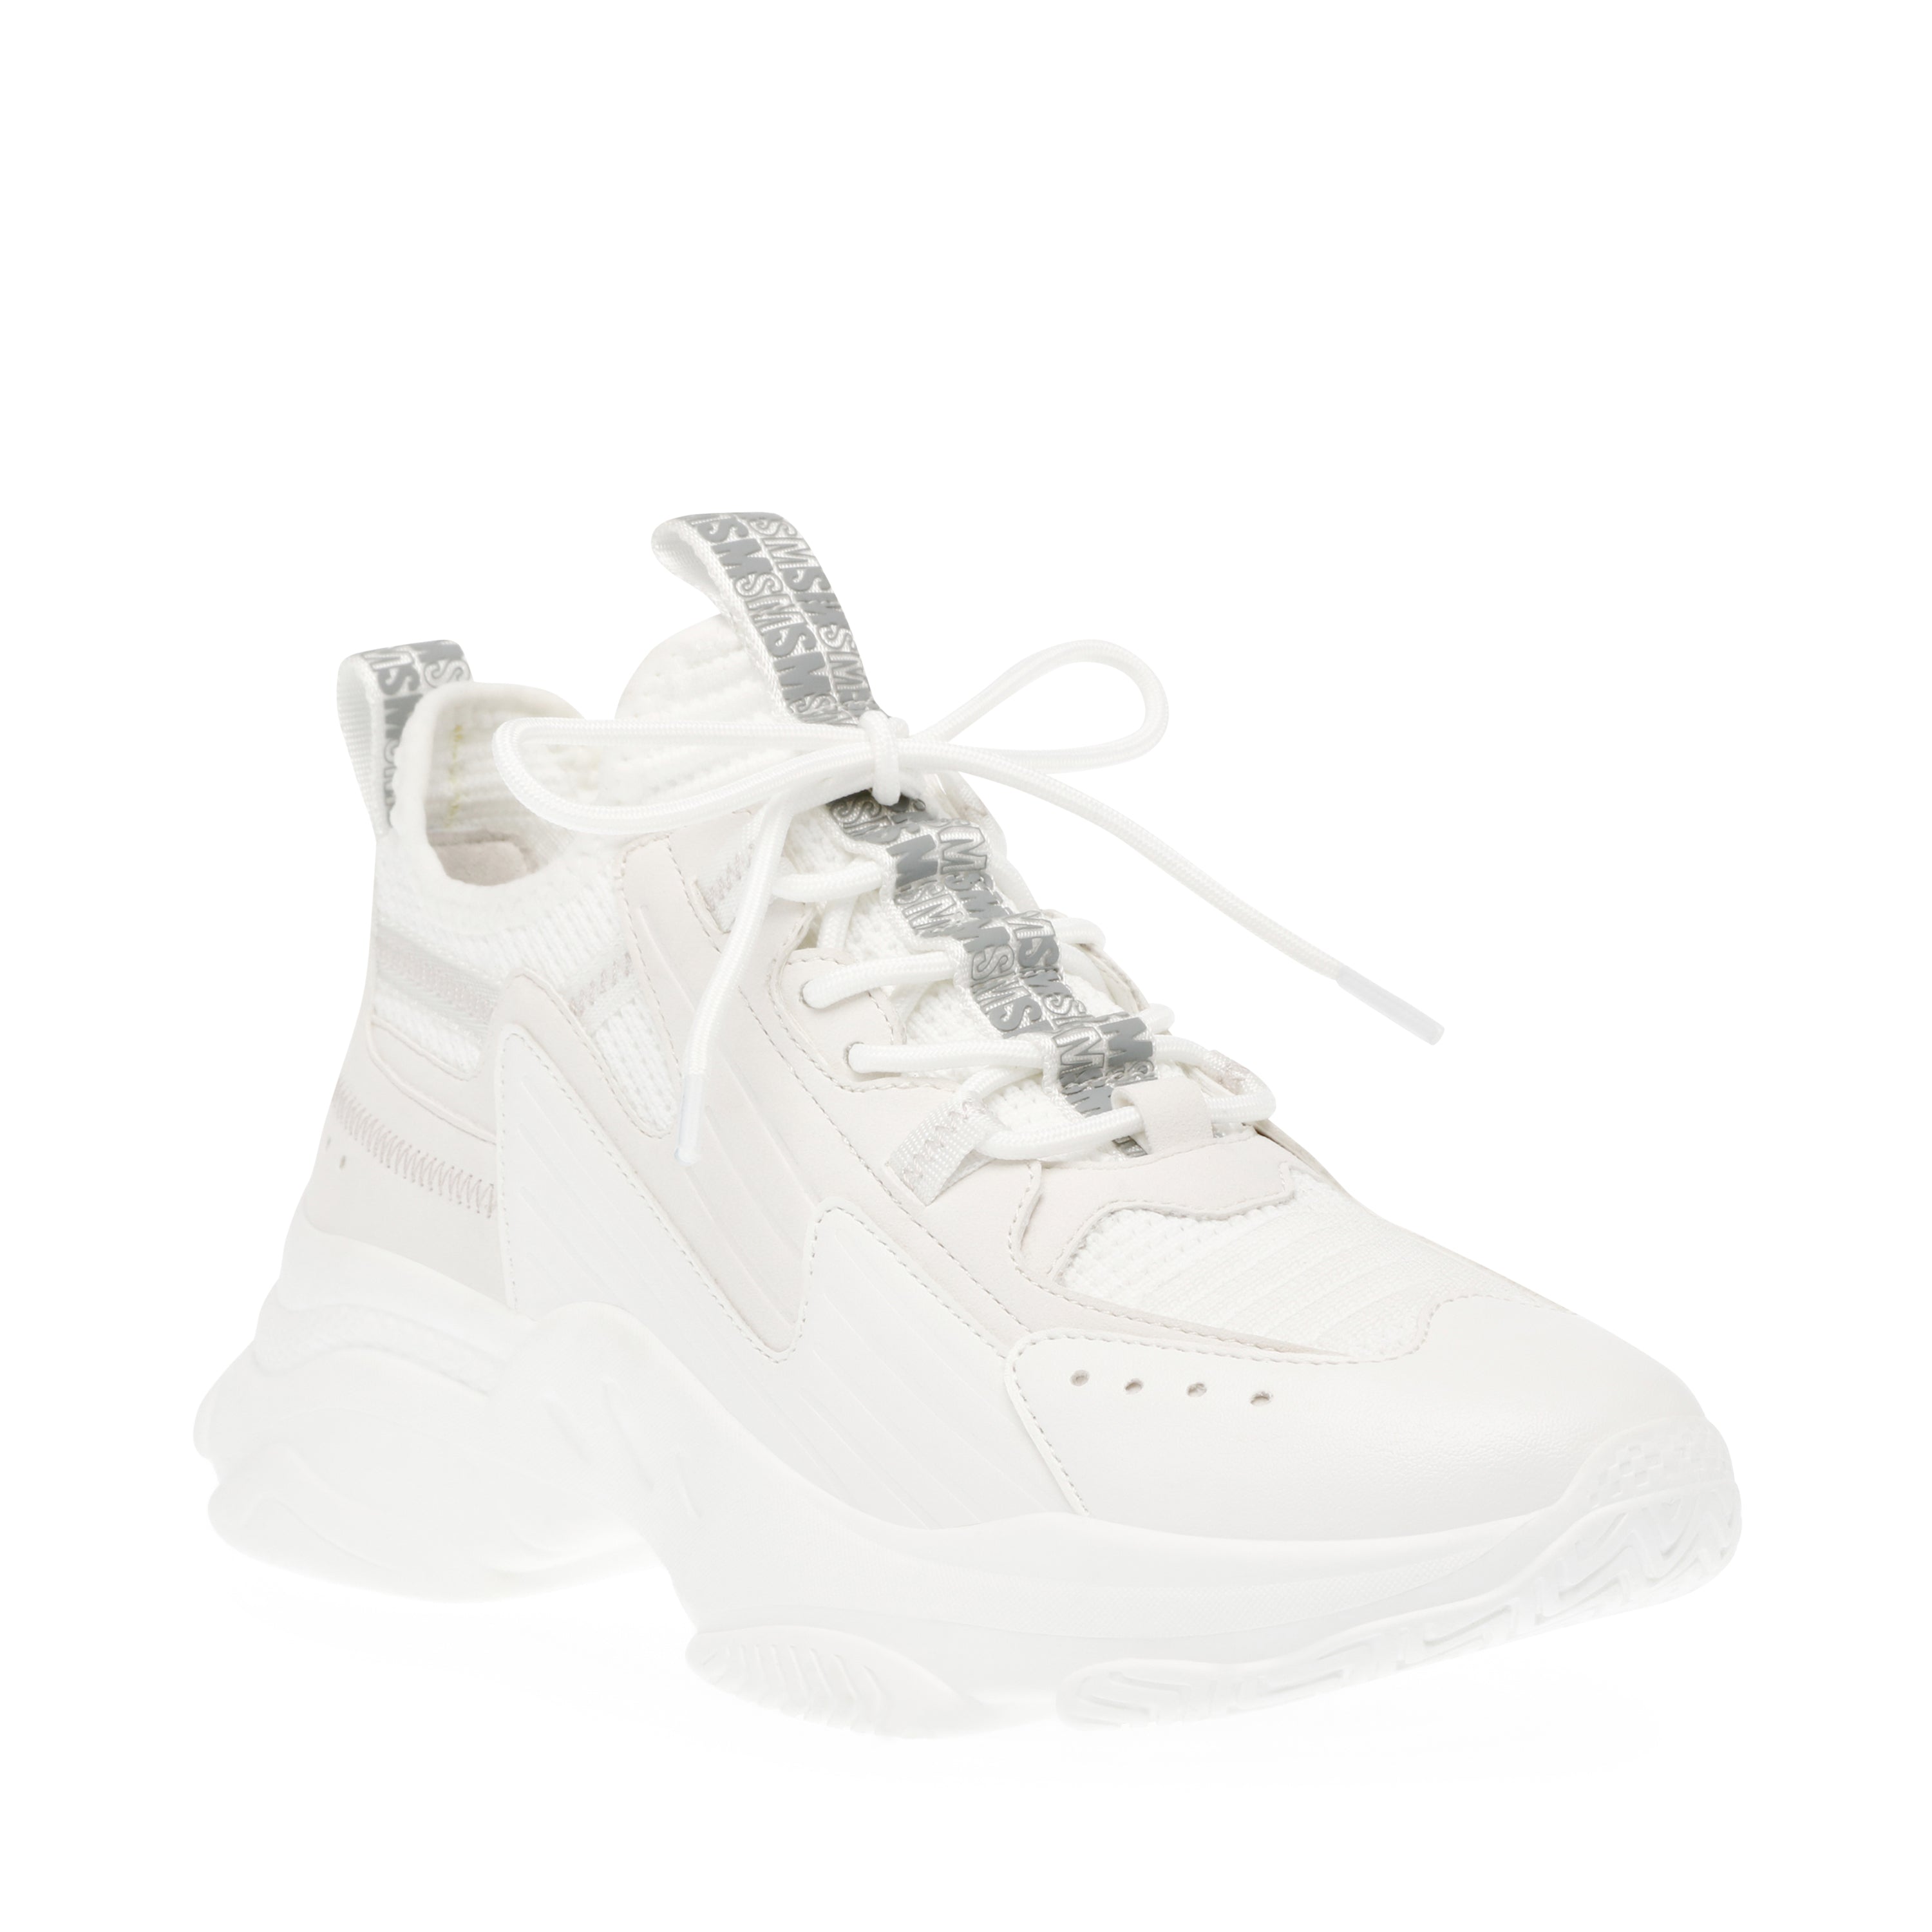 MATCH BOX WHITE/WHITE SNEAKERS- Hover Image